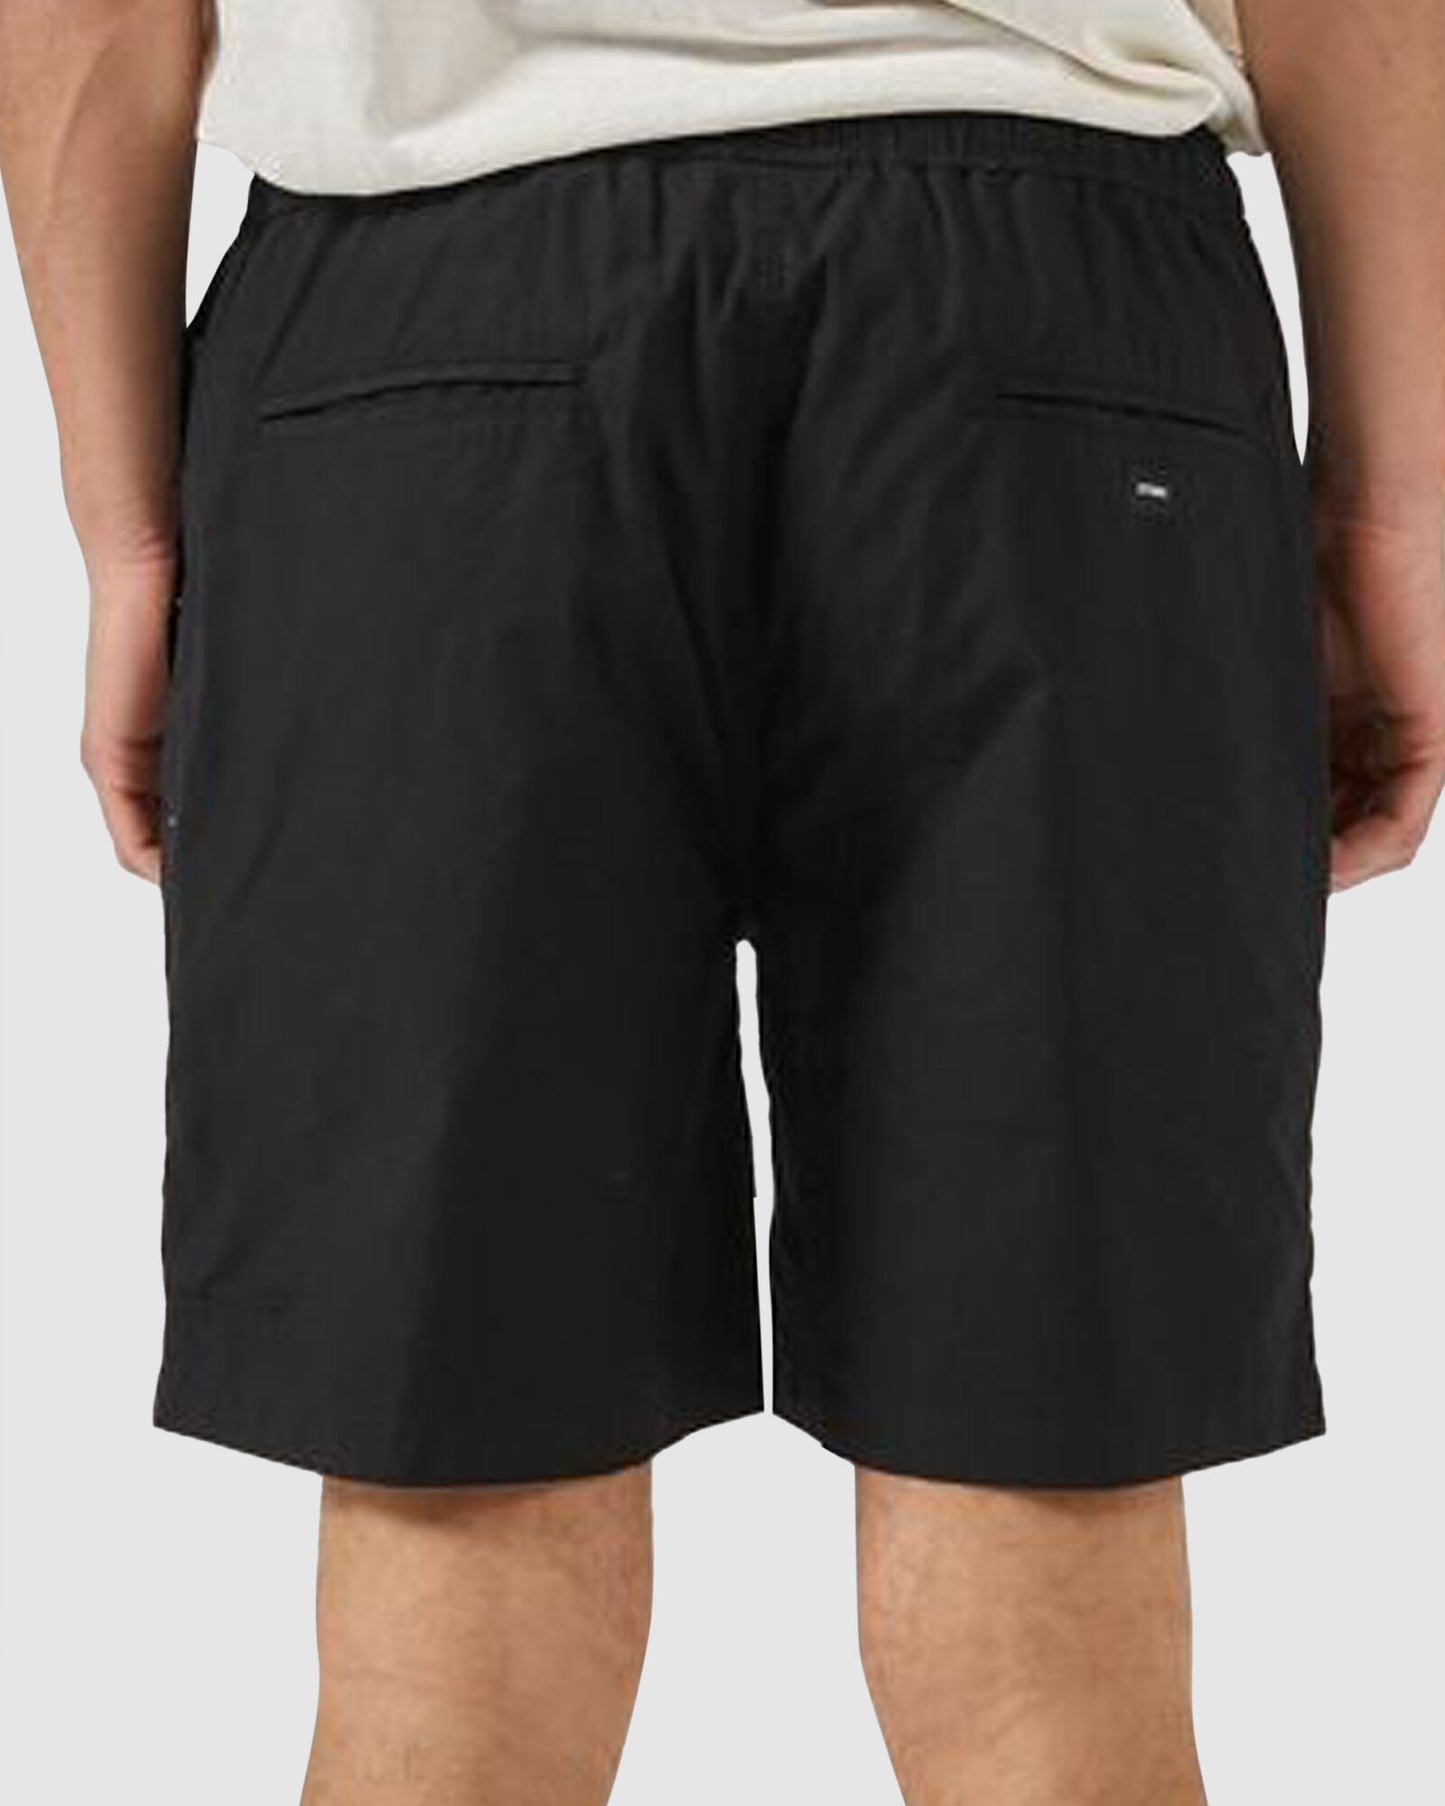 THRILLS Two Minds Mens Volley Short - Black